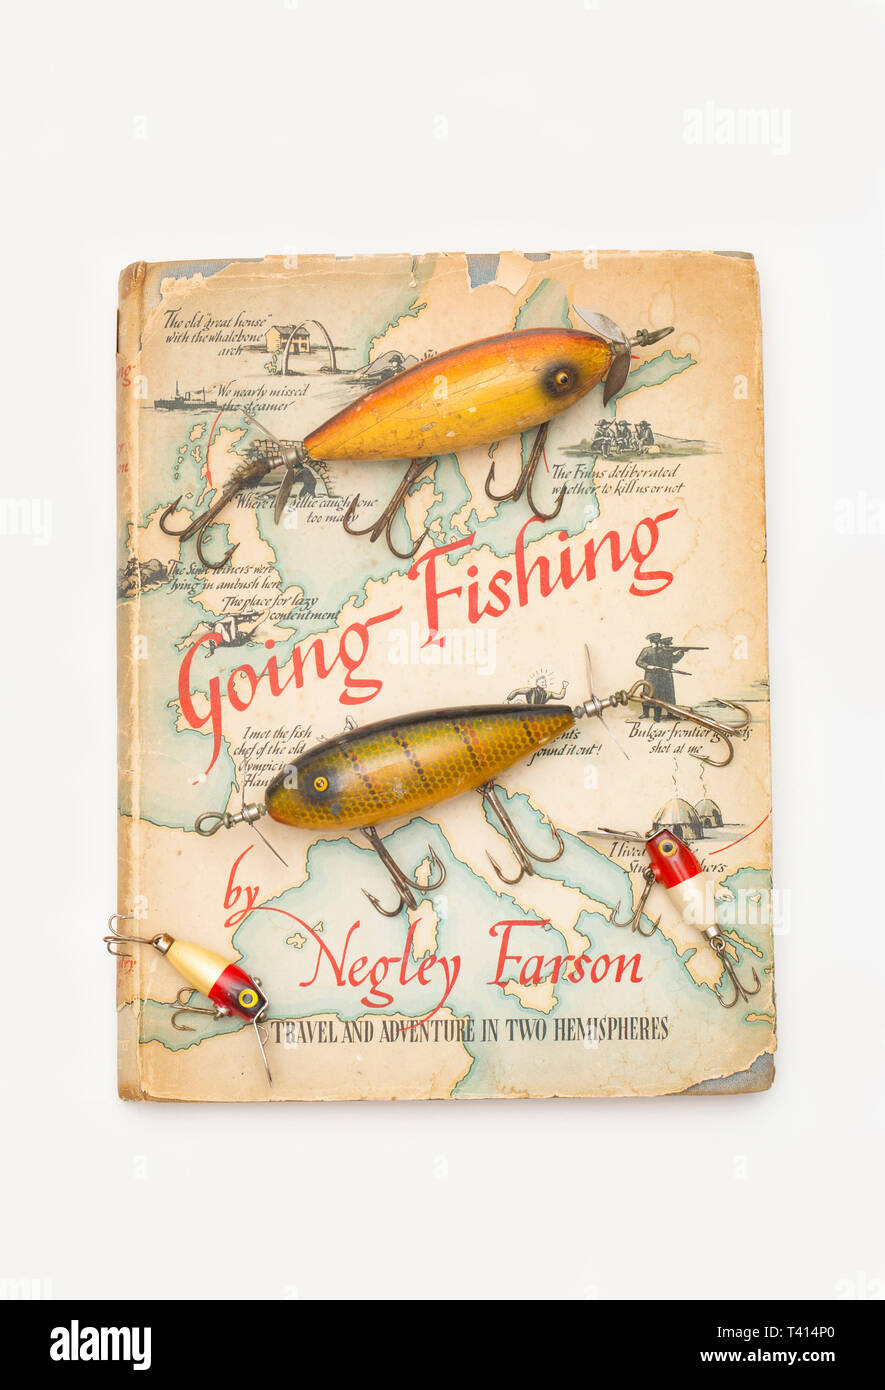 A reprinted 1943 edition of Negley Farson’s famous book Going Fishing illustrated by C.F. Tunnicliffe. The first edition being published in 1942. It h Stock Photo